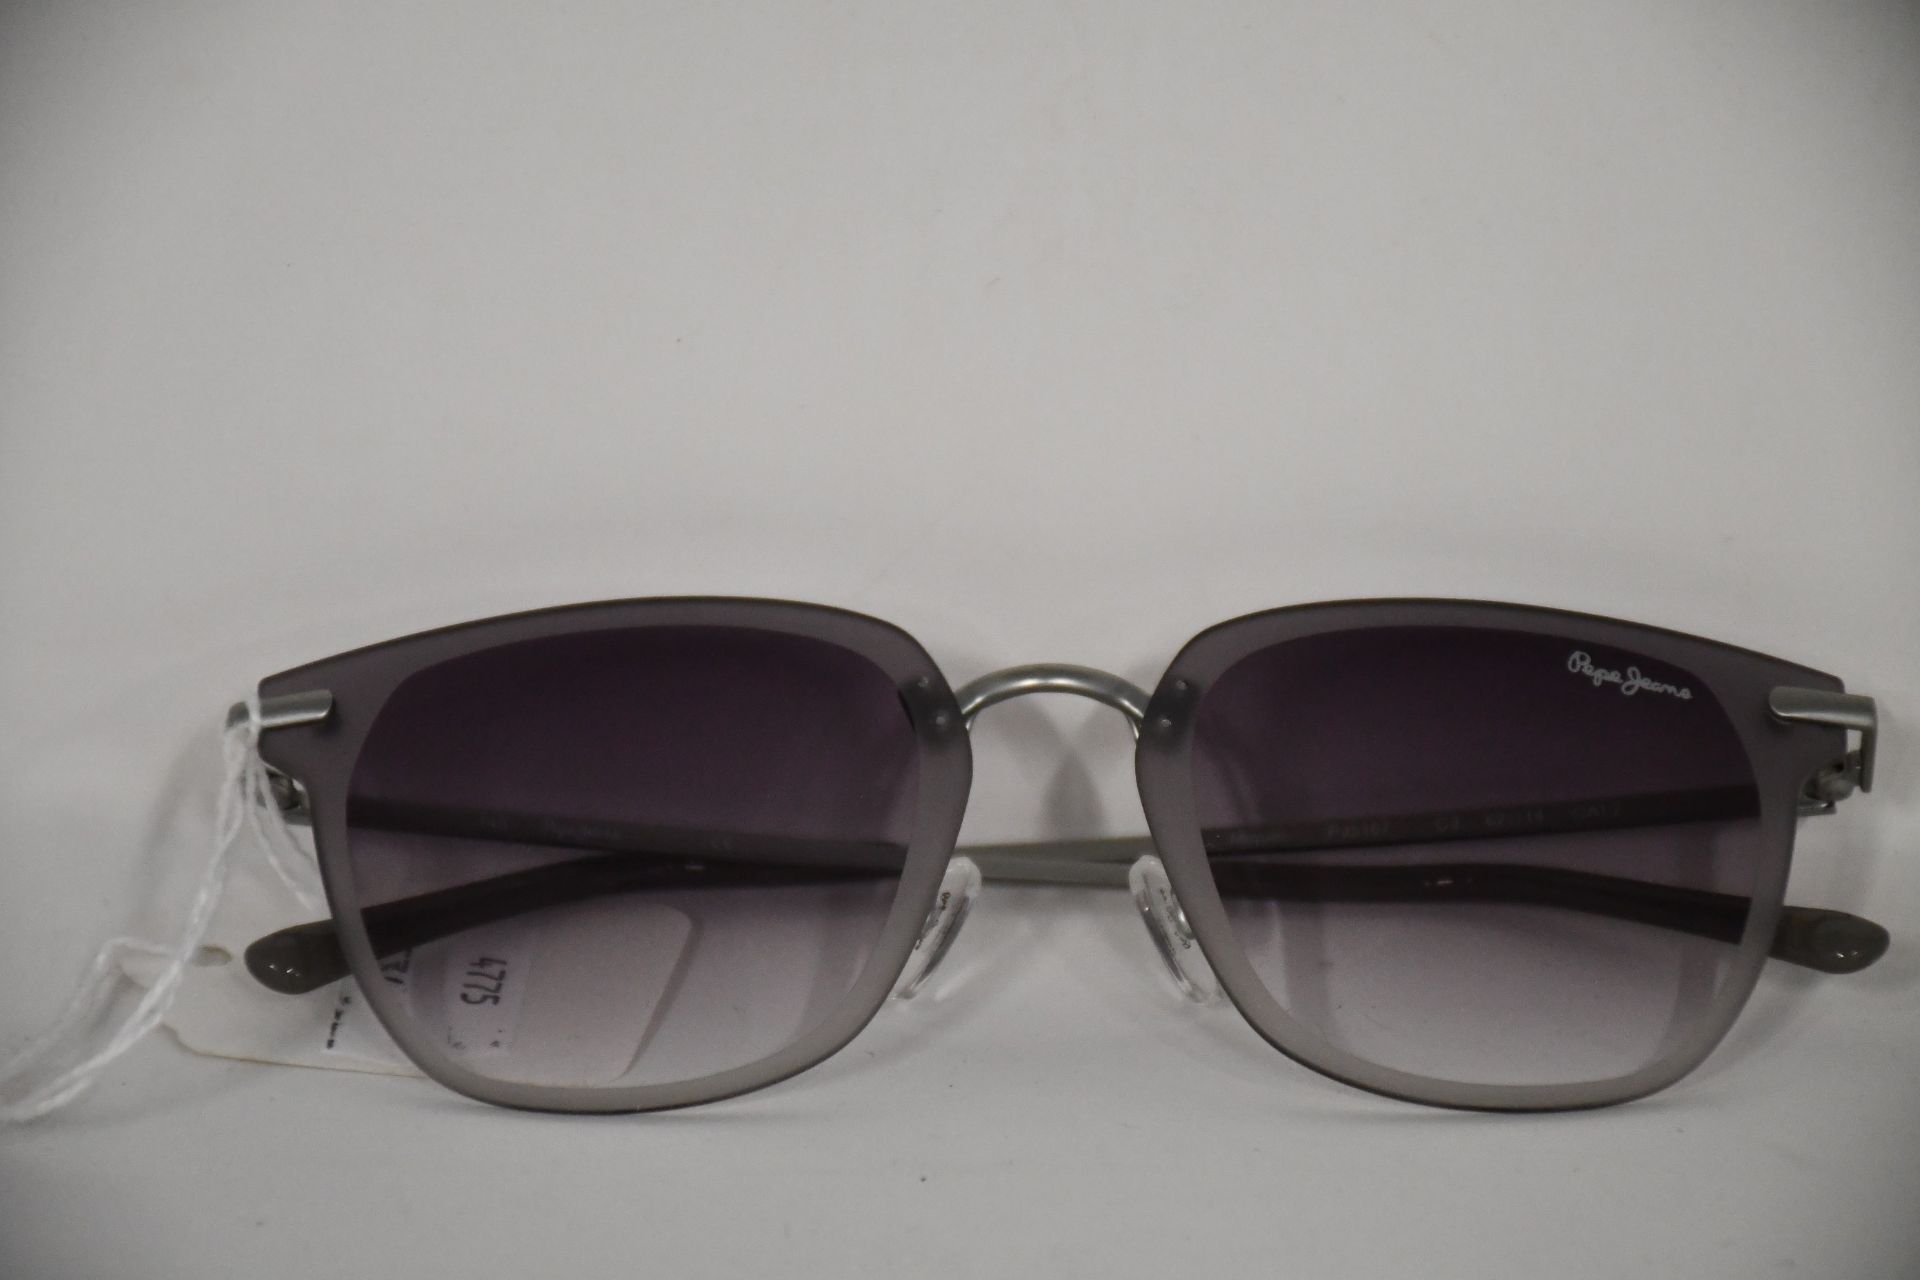 A pair of as new Pepe Jeans Miquell sunglasses (RRP £105 - No case).